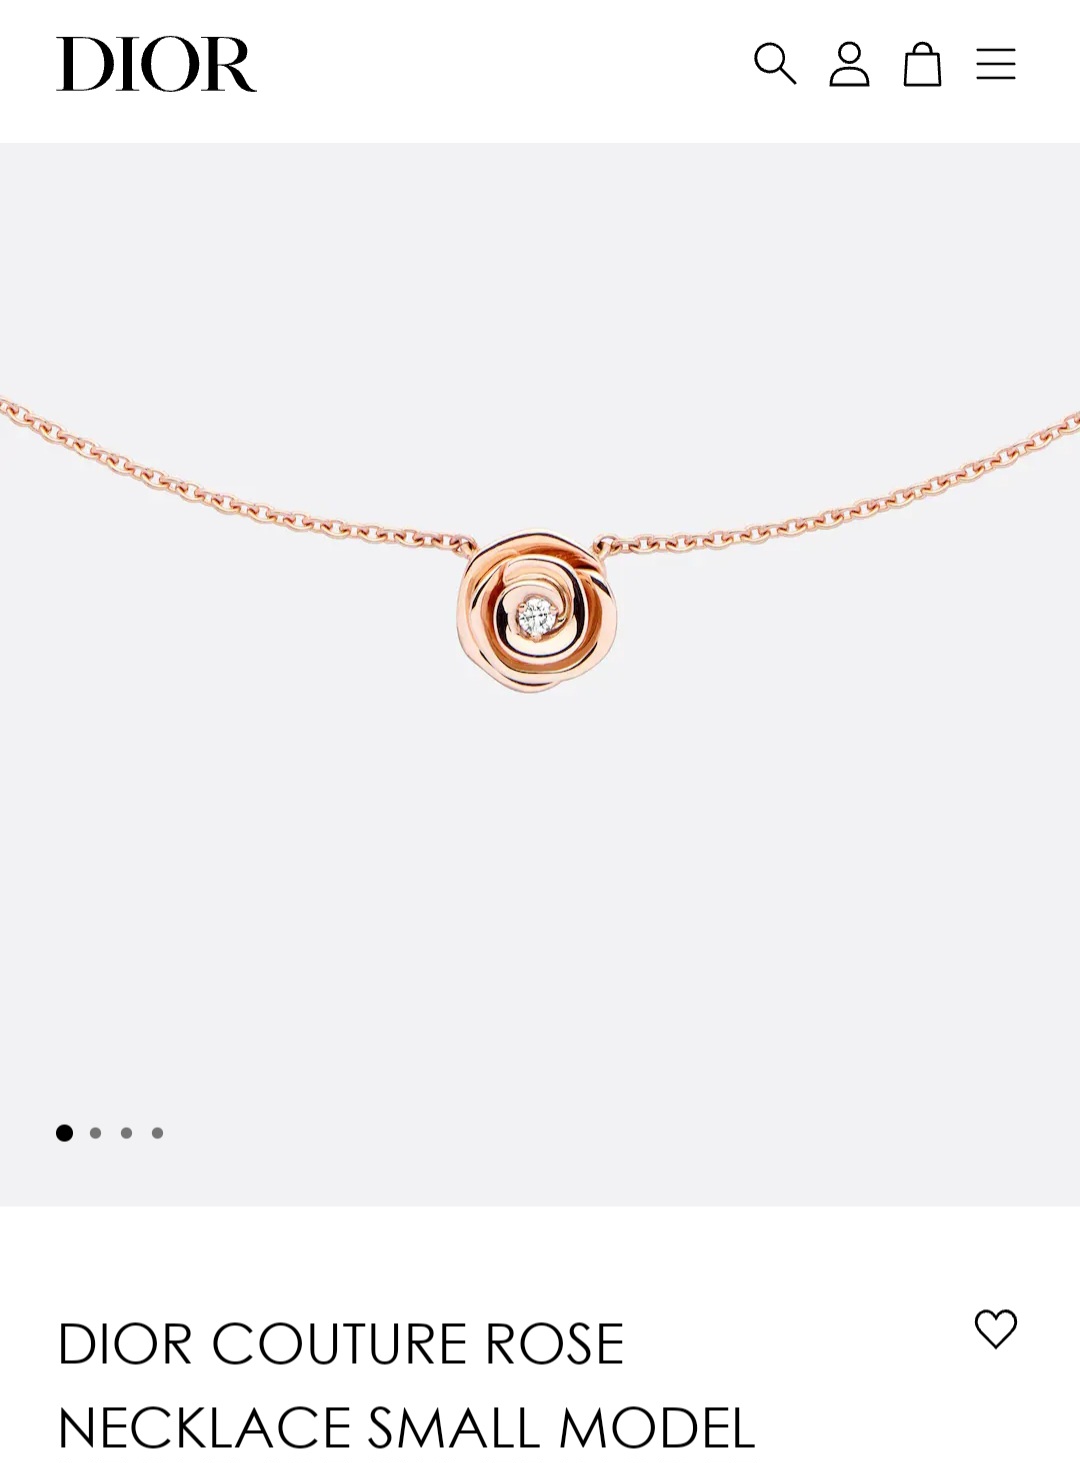 DIOR COUTURE ROSE NECKLACE SMALL MODEL